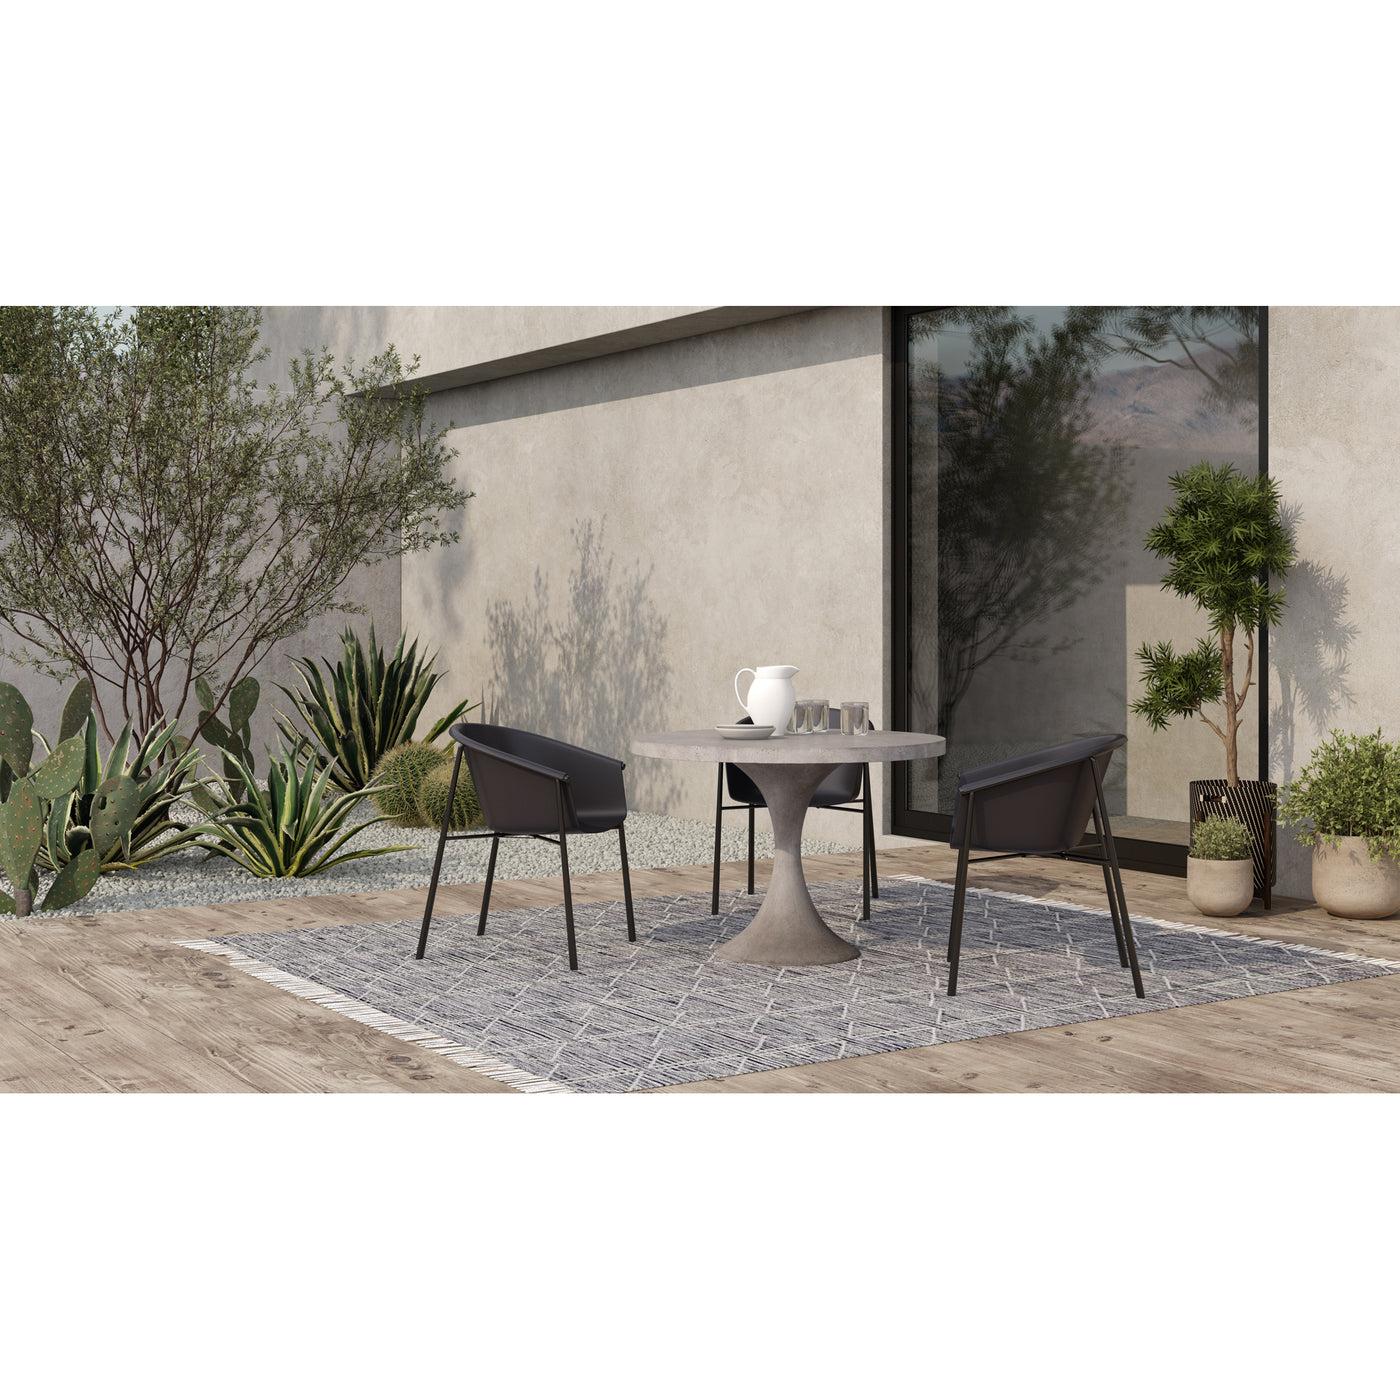 The beautifully shaped seat on the Shindig outdoor dining chair is a must for the patio. The waterproof seats allow for ea...